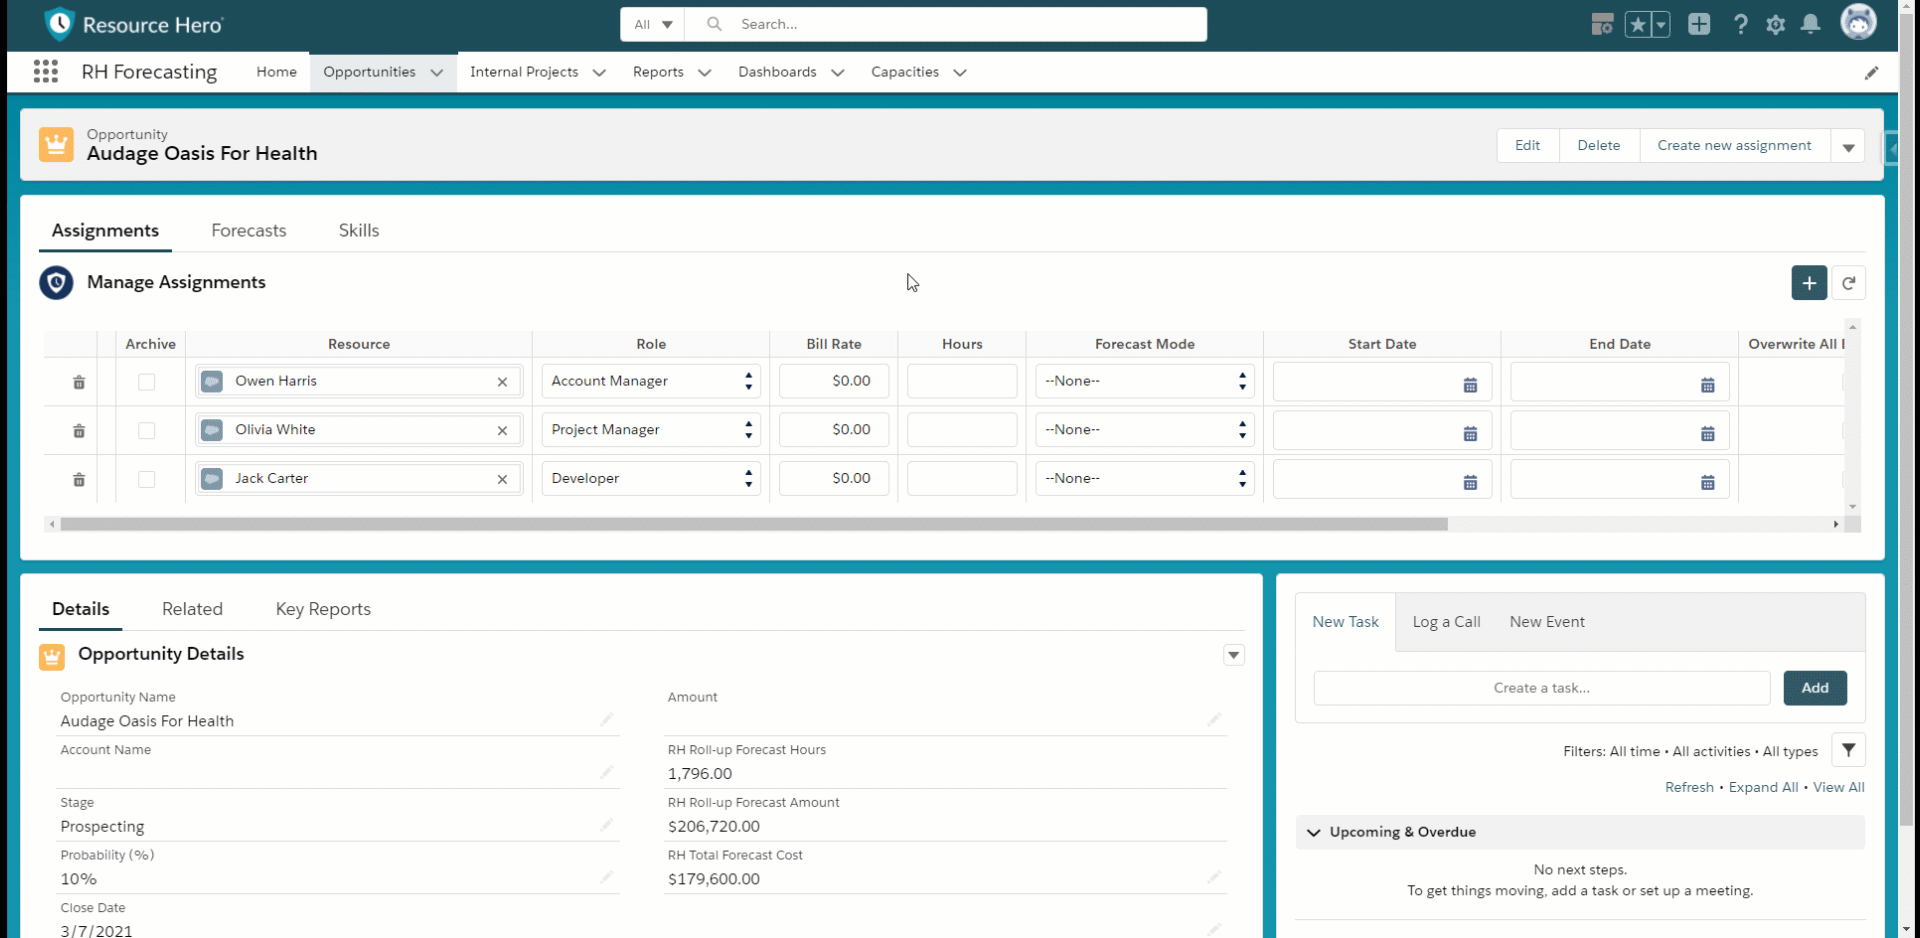 Update existing assignments with the Manage Assignments Lightning Component